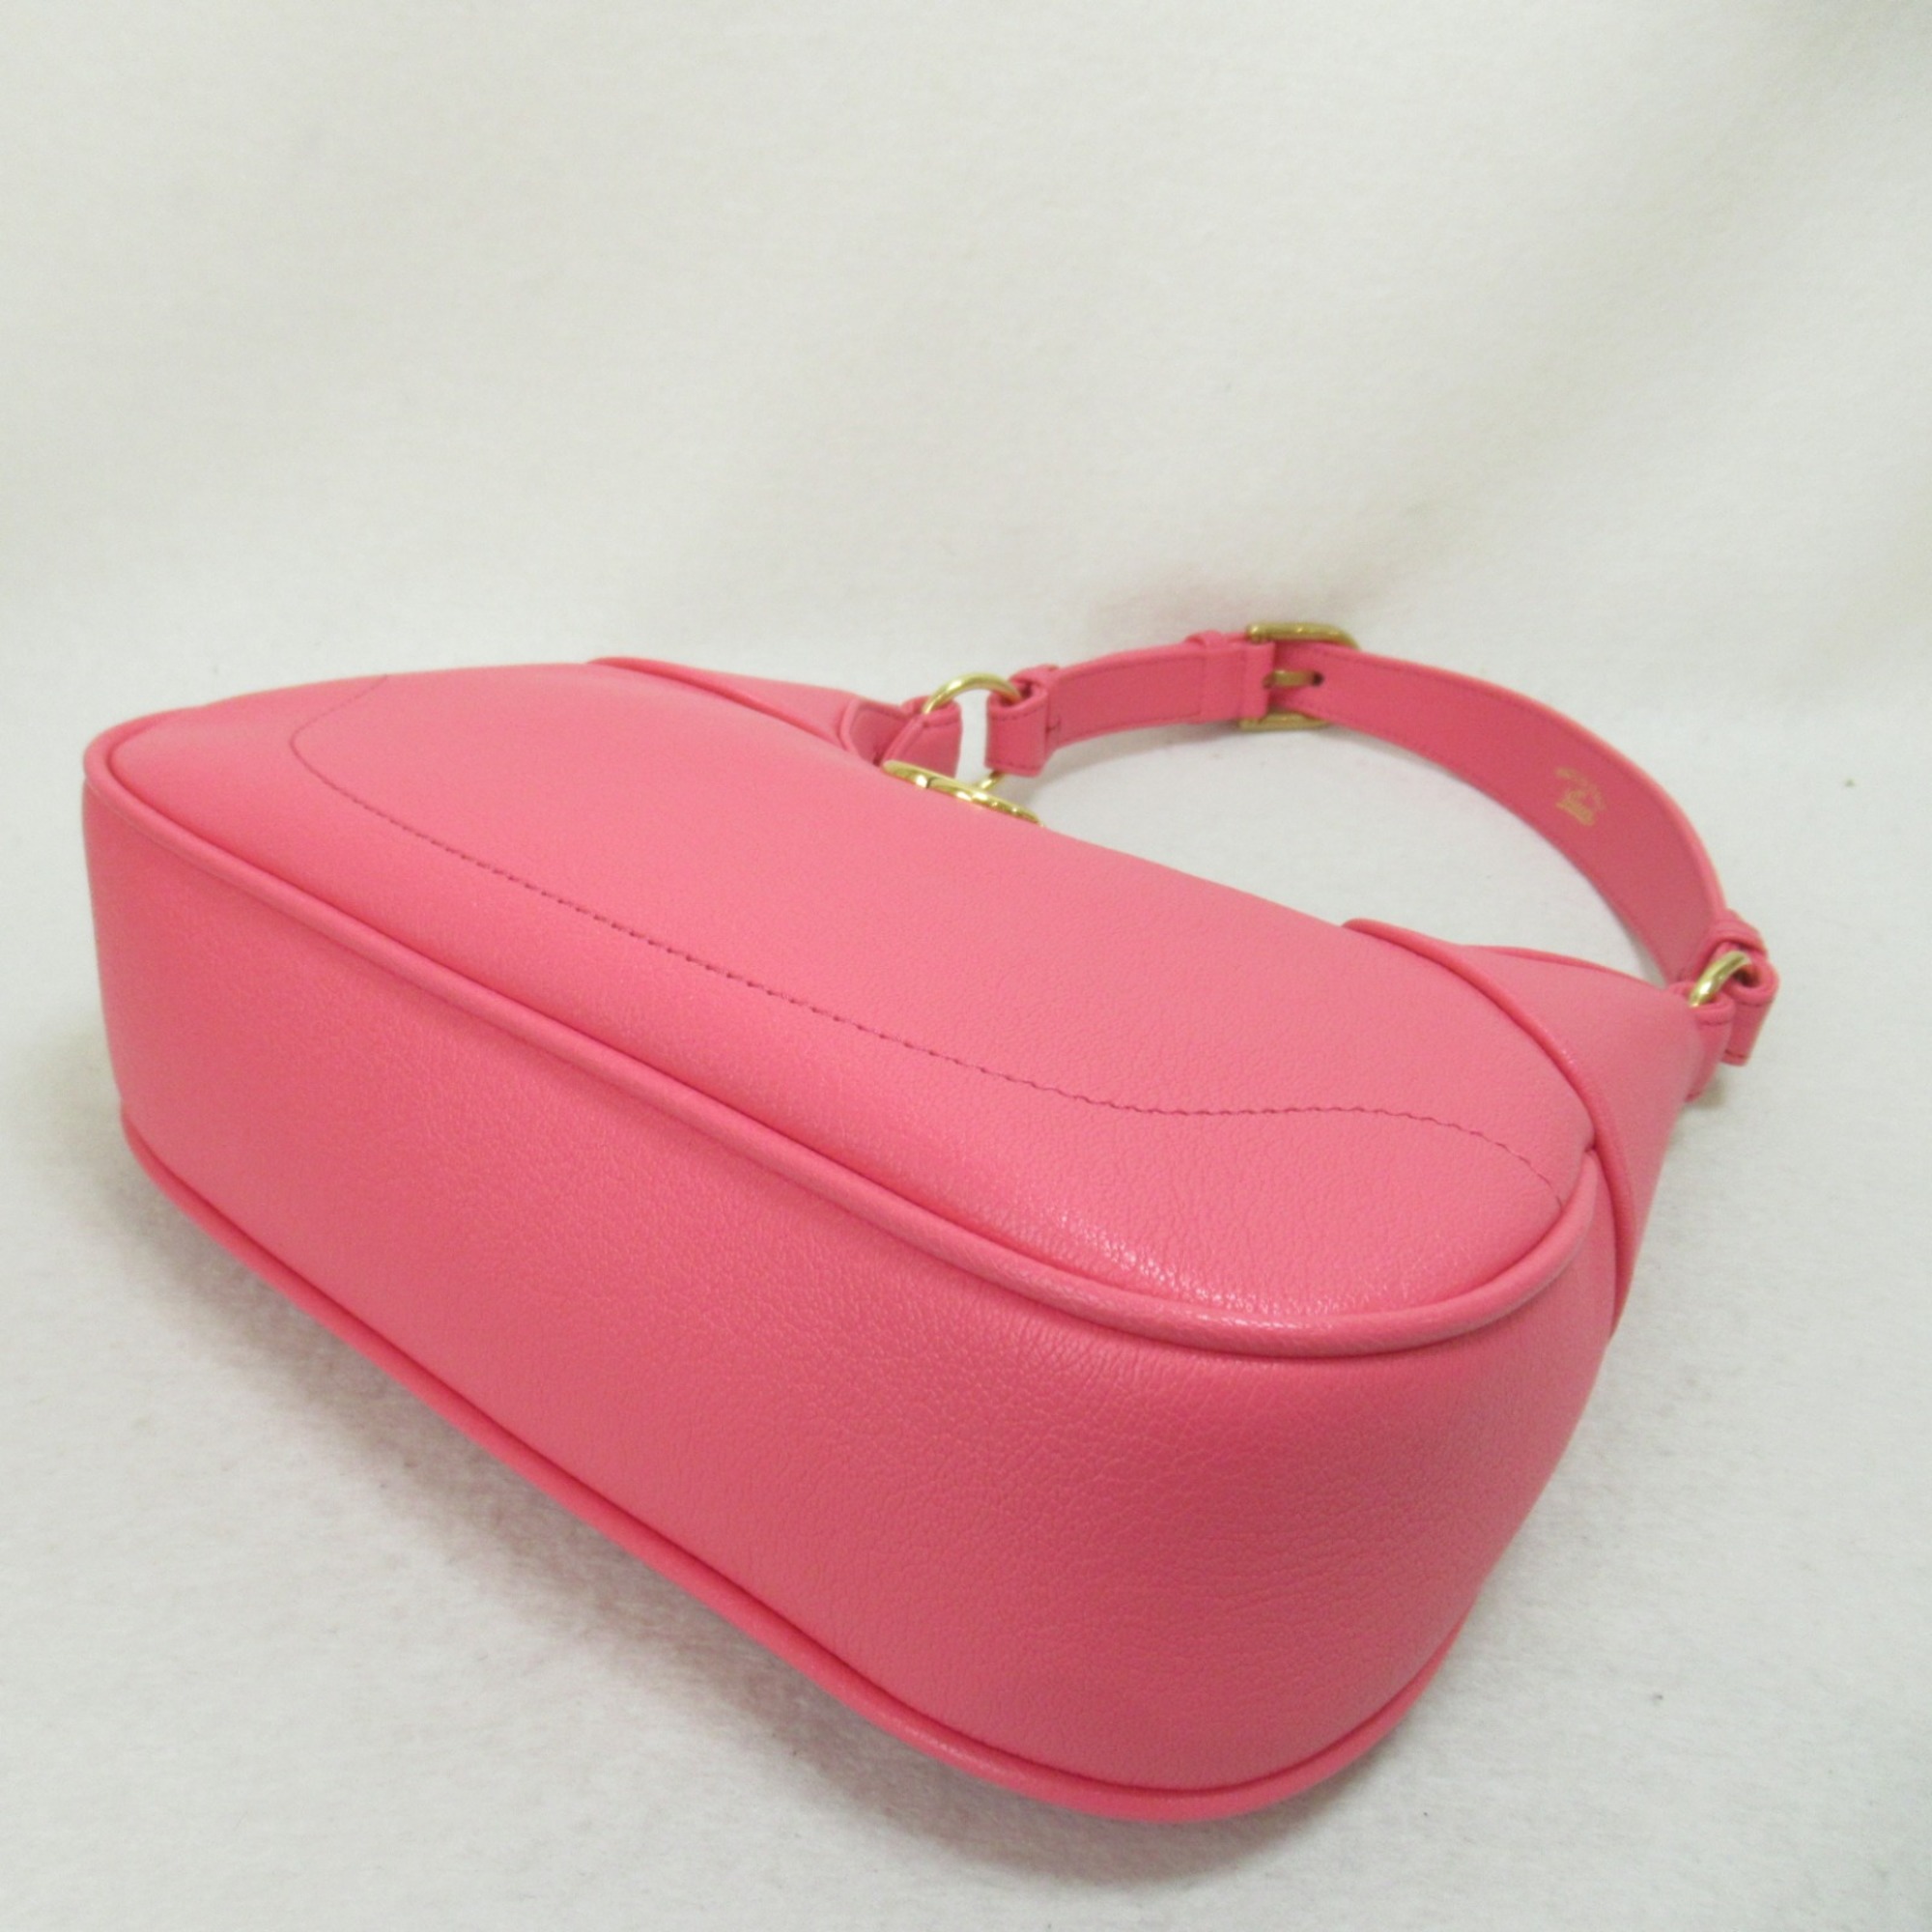 GUCCI Aphrodite Small Shoulder Bag Pink leather 731817AAA9F6627